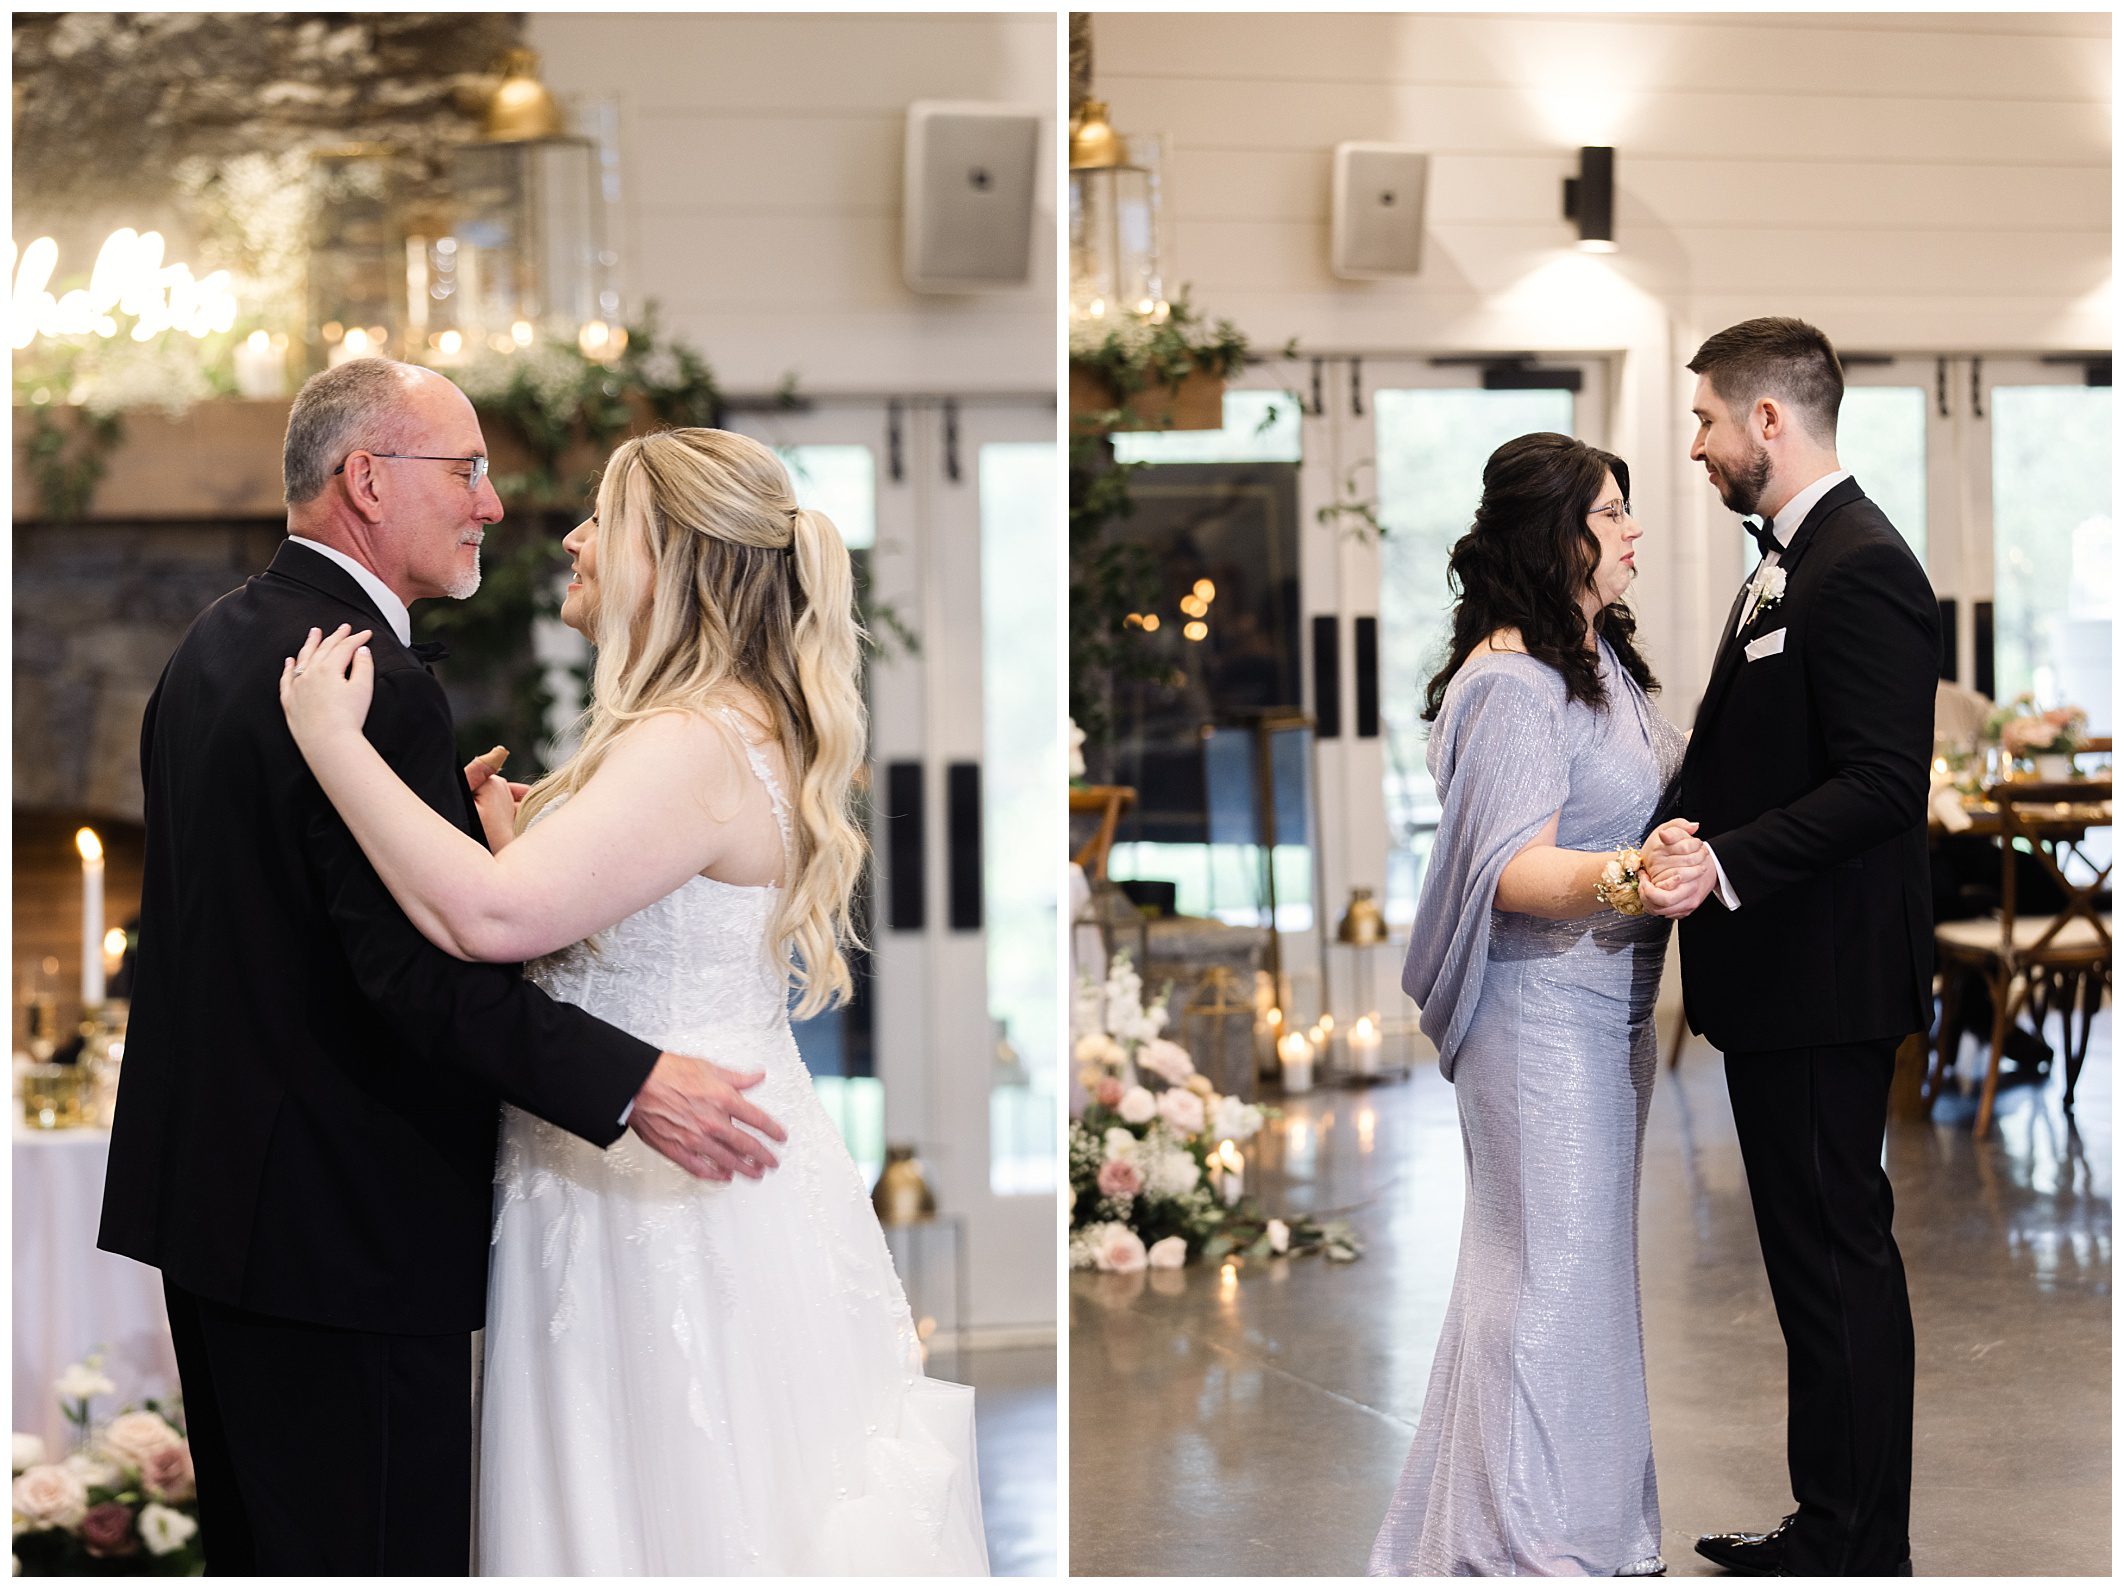 Two images of wedding dances at Chestnut Ridge: on the left, a bride dances with an older man in a suit; on the right, a bride in a lavender dress dances with a groom in a tuxedo.